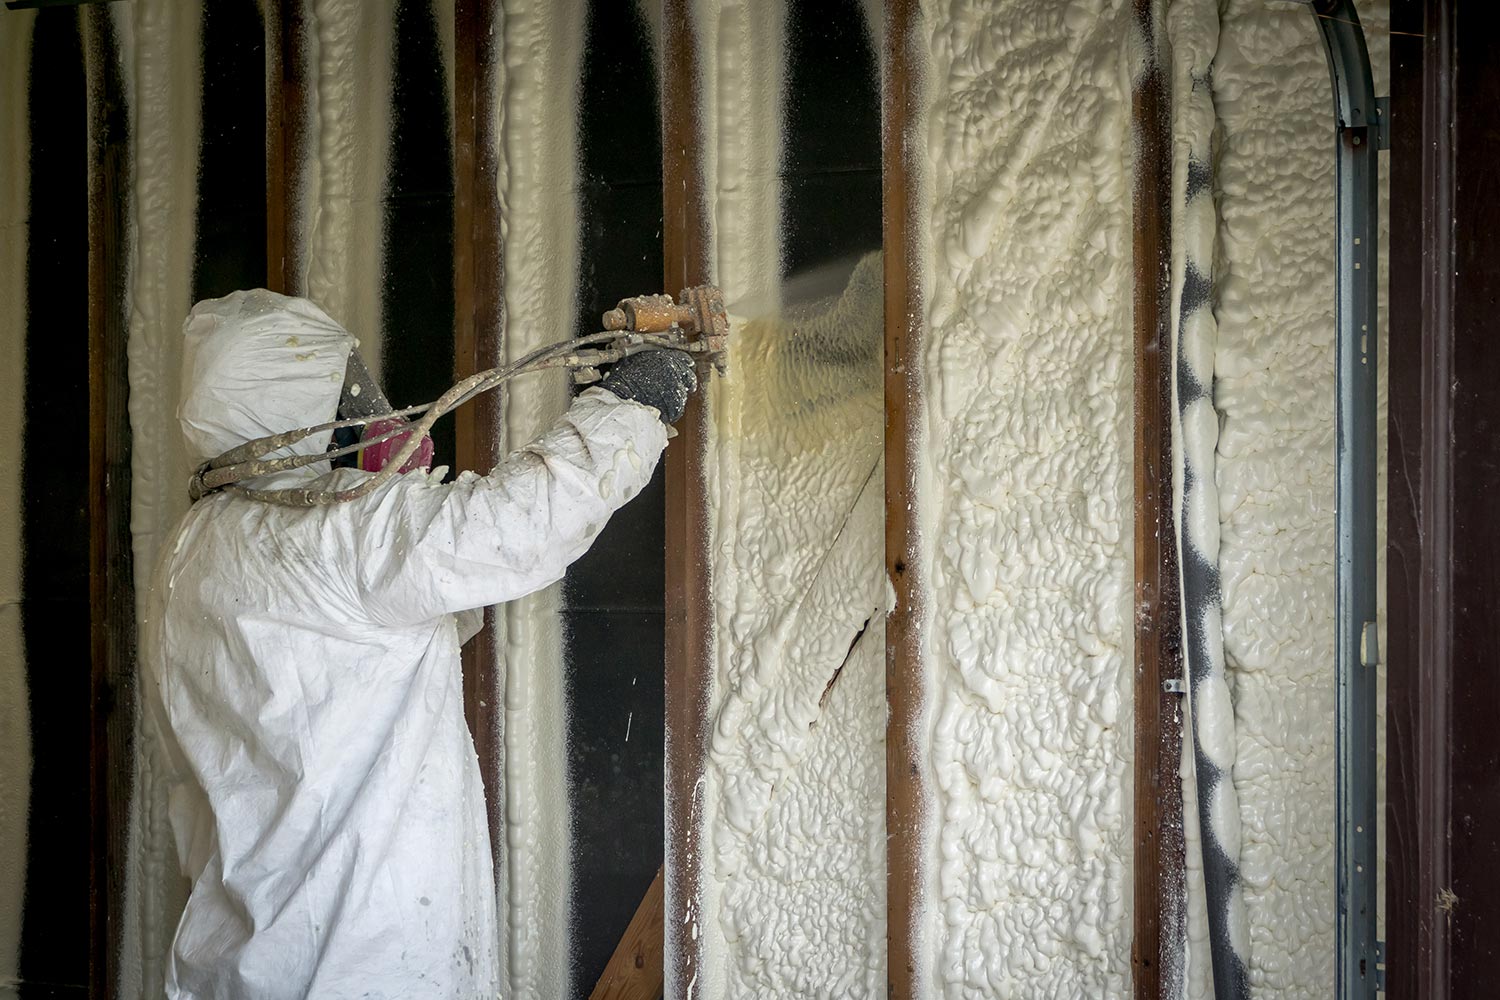 Worker spraying closed cell spray foam insulation on a home